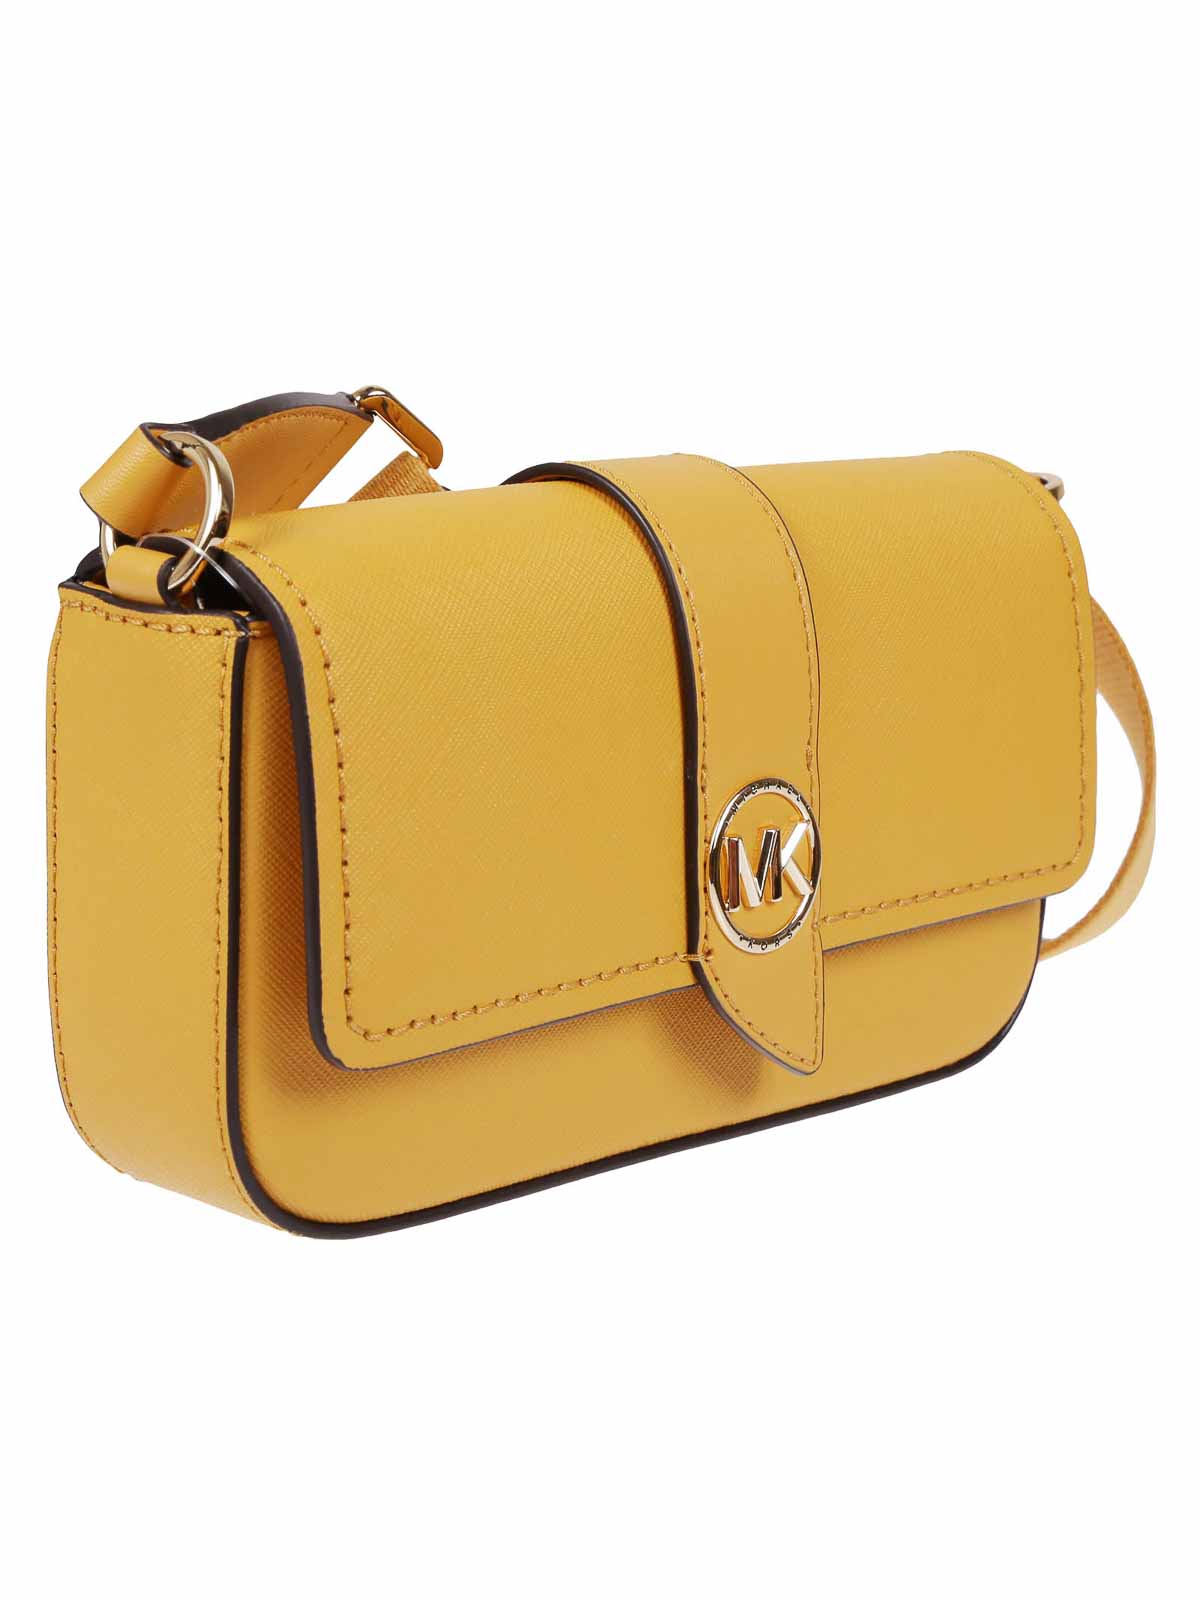 Shop Michael Kors Saffiano Leather Bag In Yellow